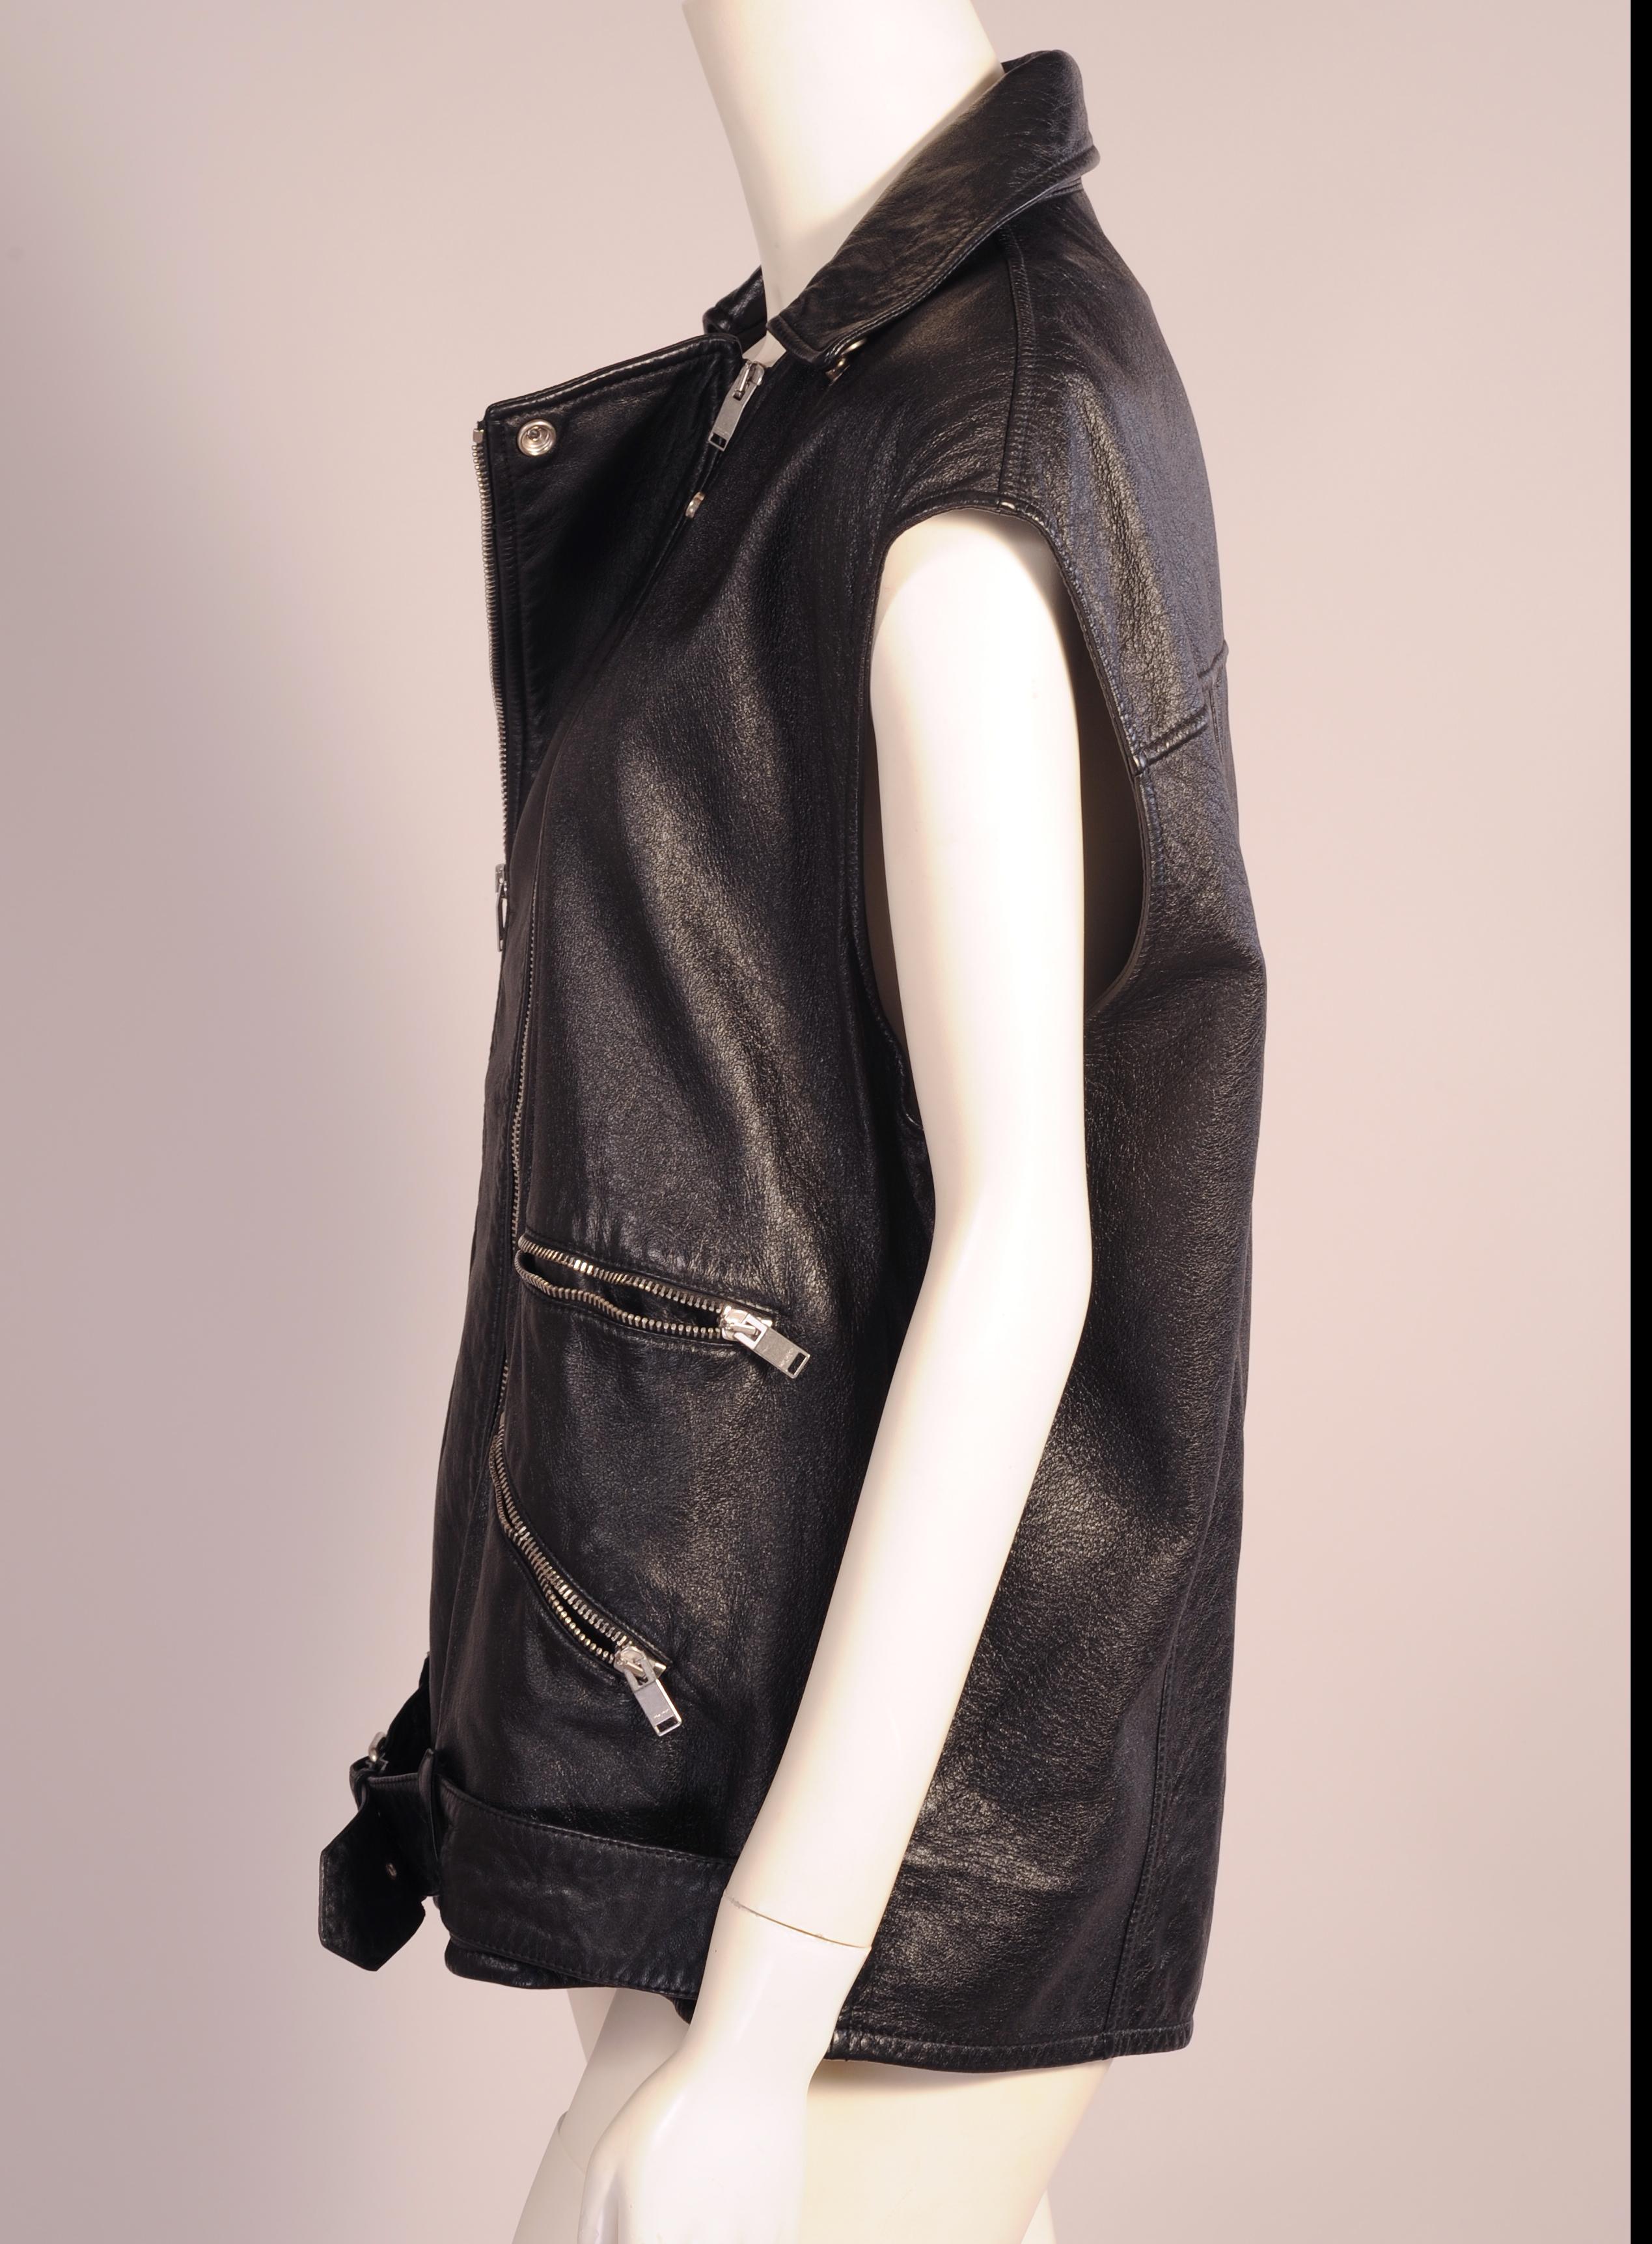 A stylish version of the classic biker jacket this sleeveless jacket is made from black leather with a double zipper opening, two zippered pockets on each side, and a half belt with buckle. It is in excellent condition and marked a French size